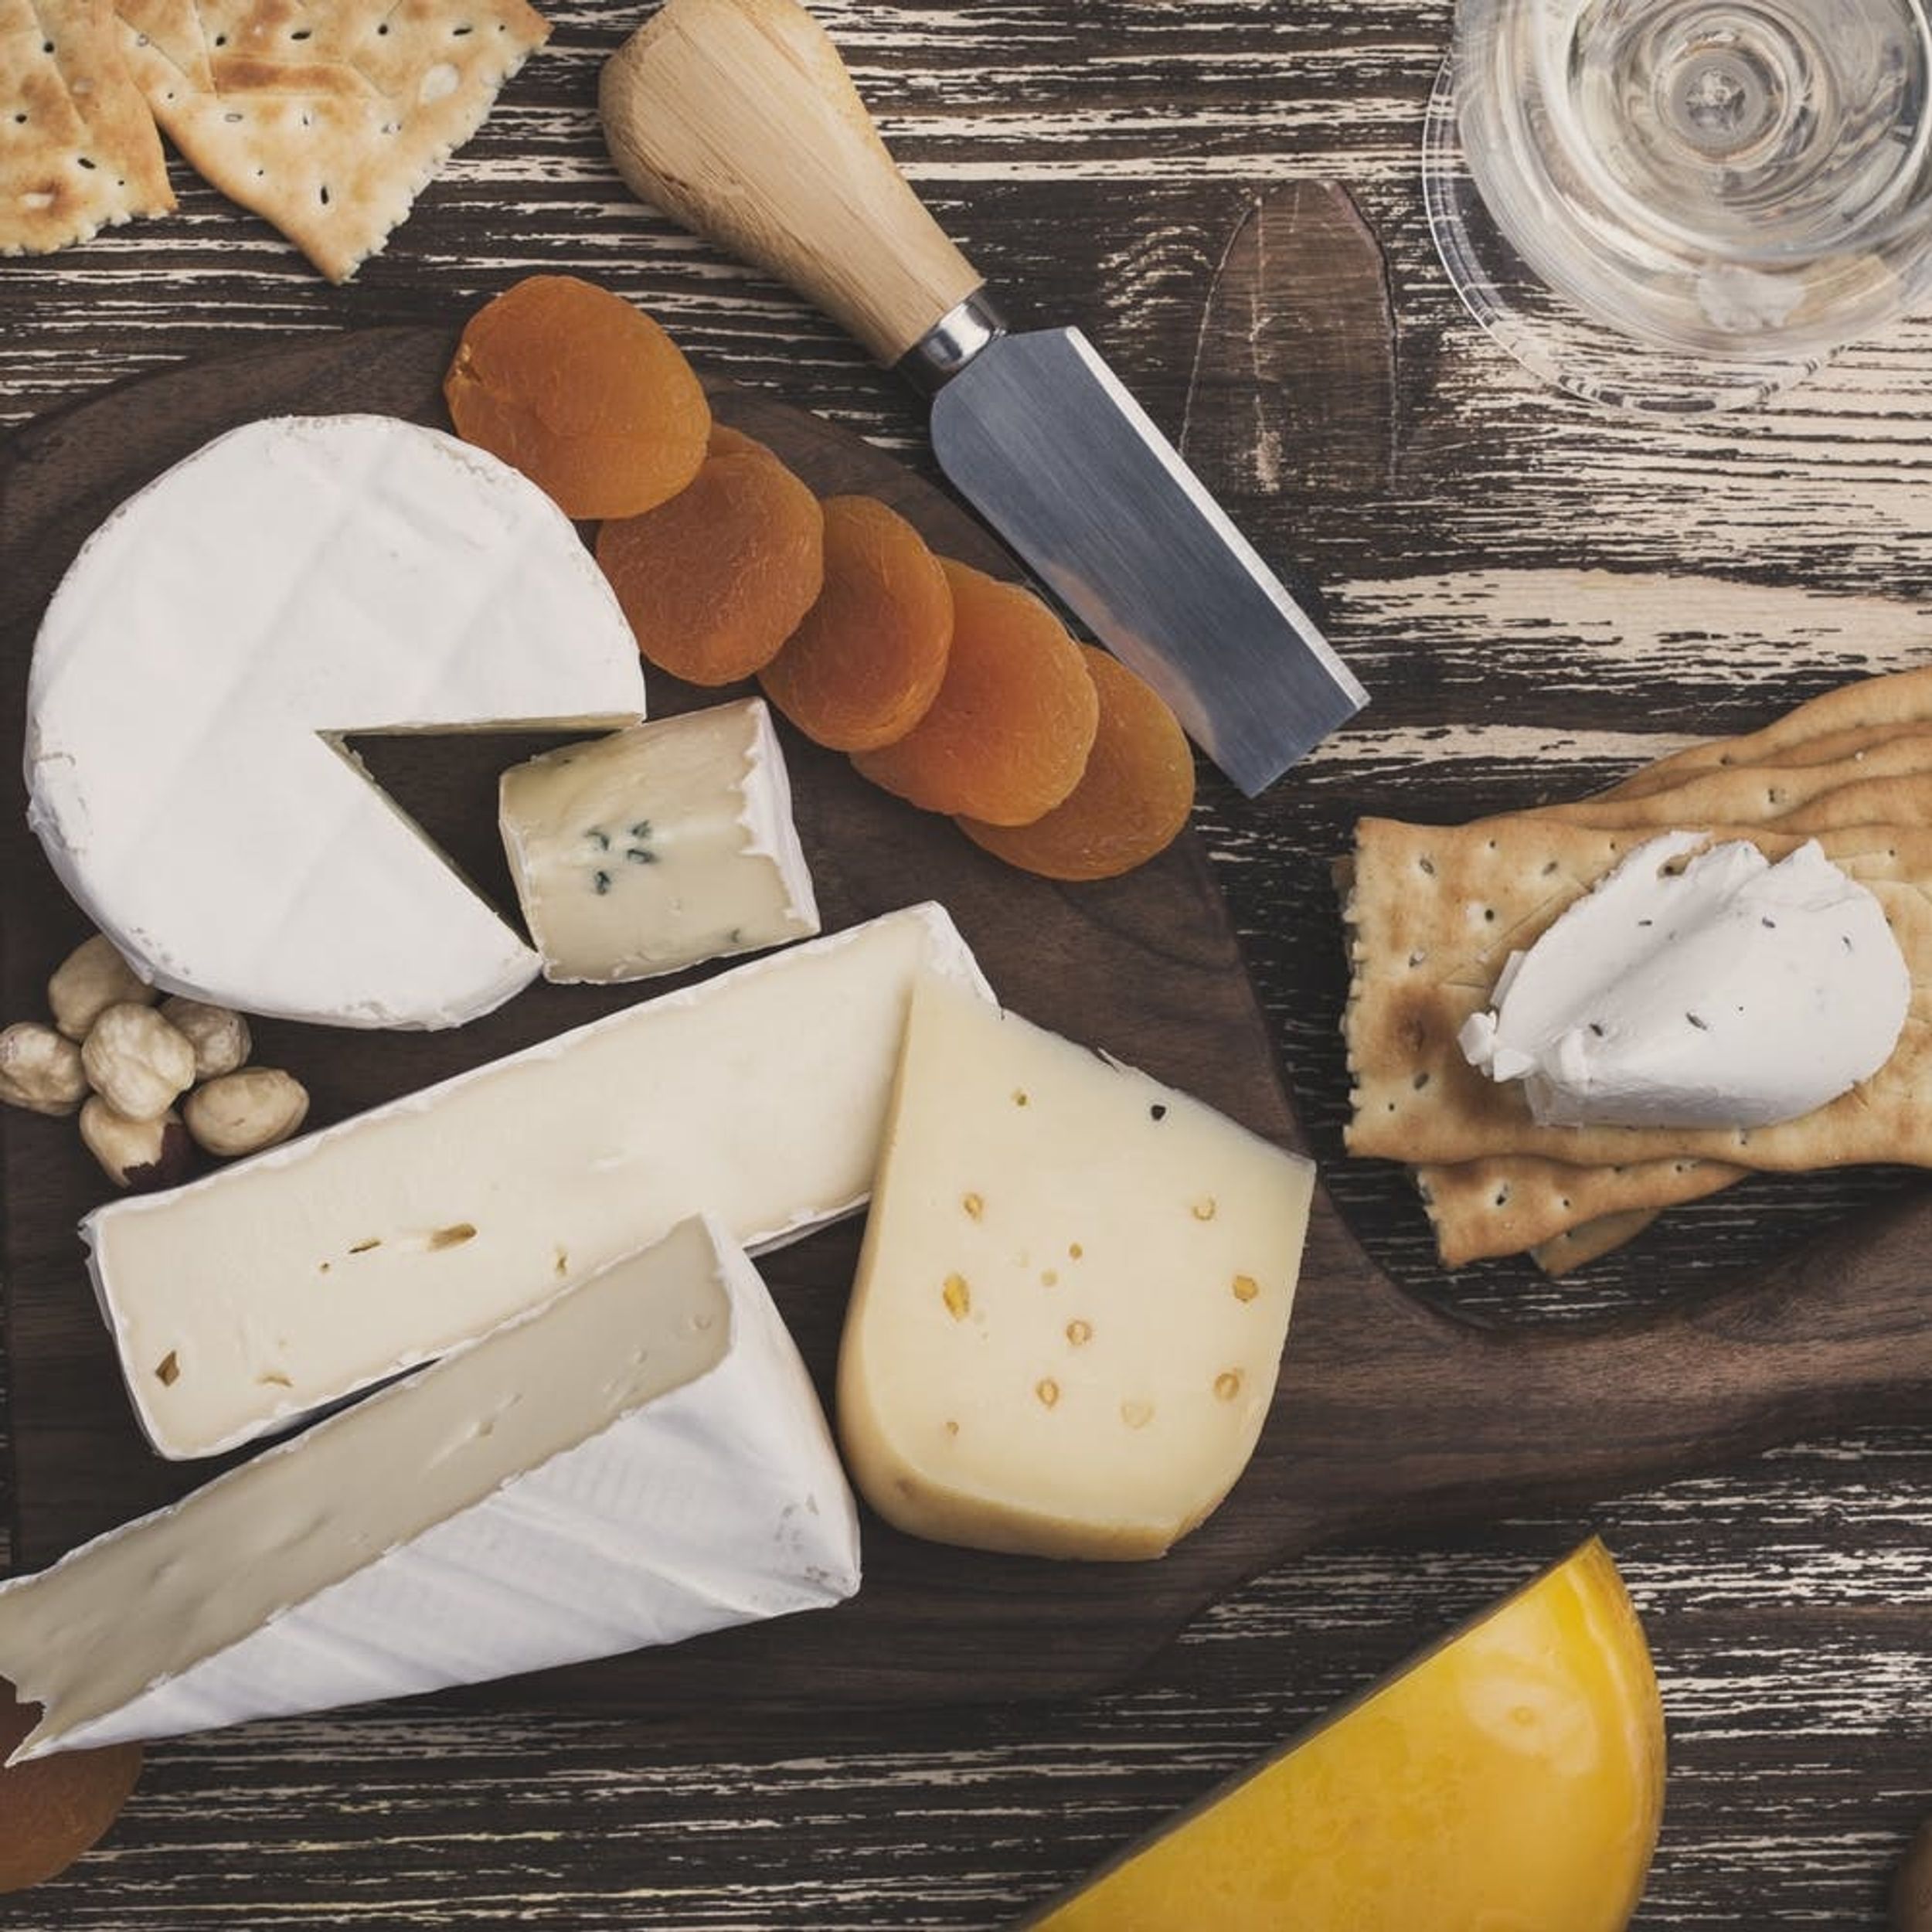 Study Finds Eating Cheese Every Day May Be Good for You, and BRB, We’re Getting Some Cheddar